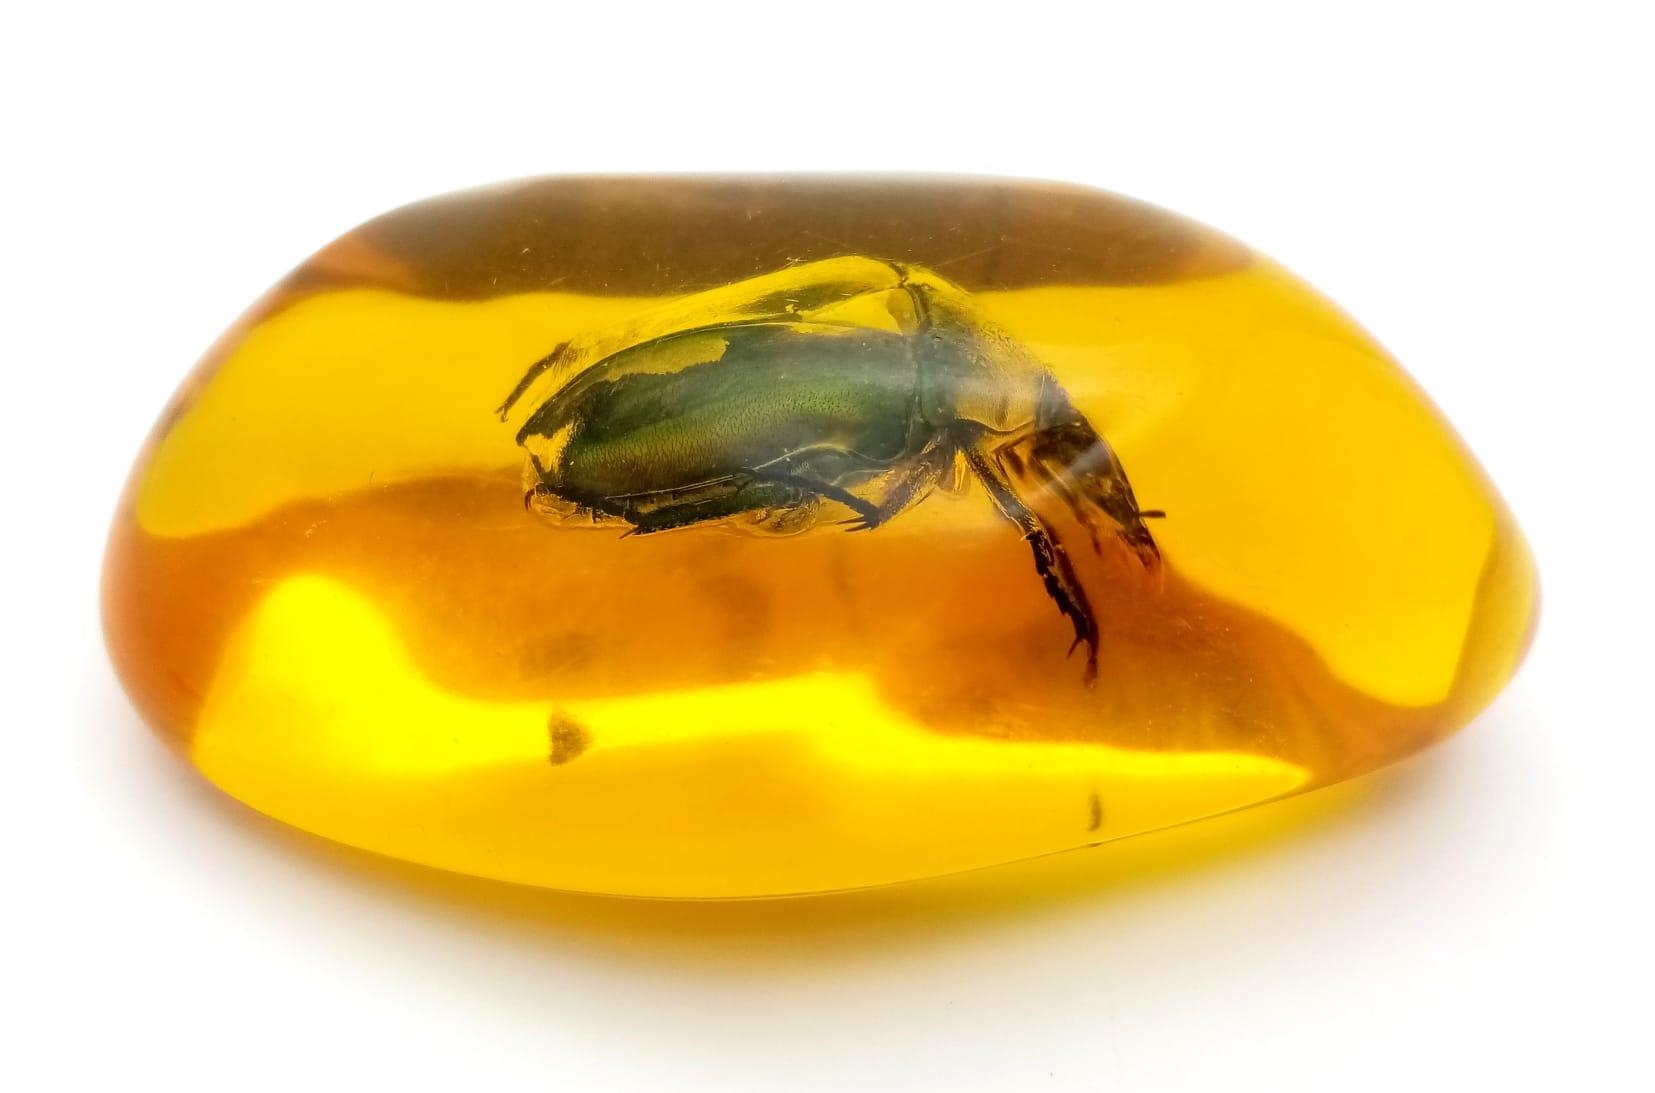 A Shiny Green Beetle Contemplates His Life... Arms Outstretched. Pendant or paperweight. 6cm - Image 2 of 3